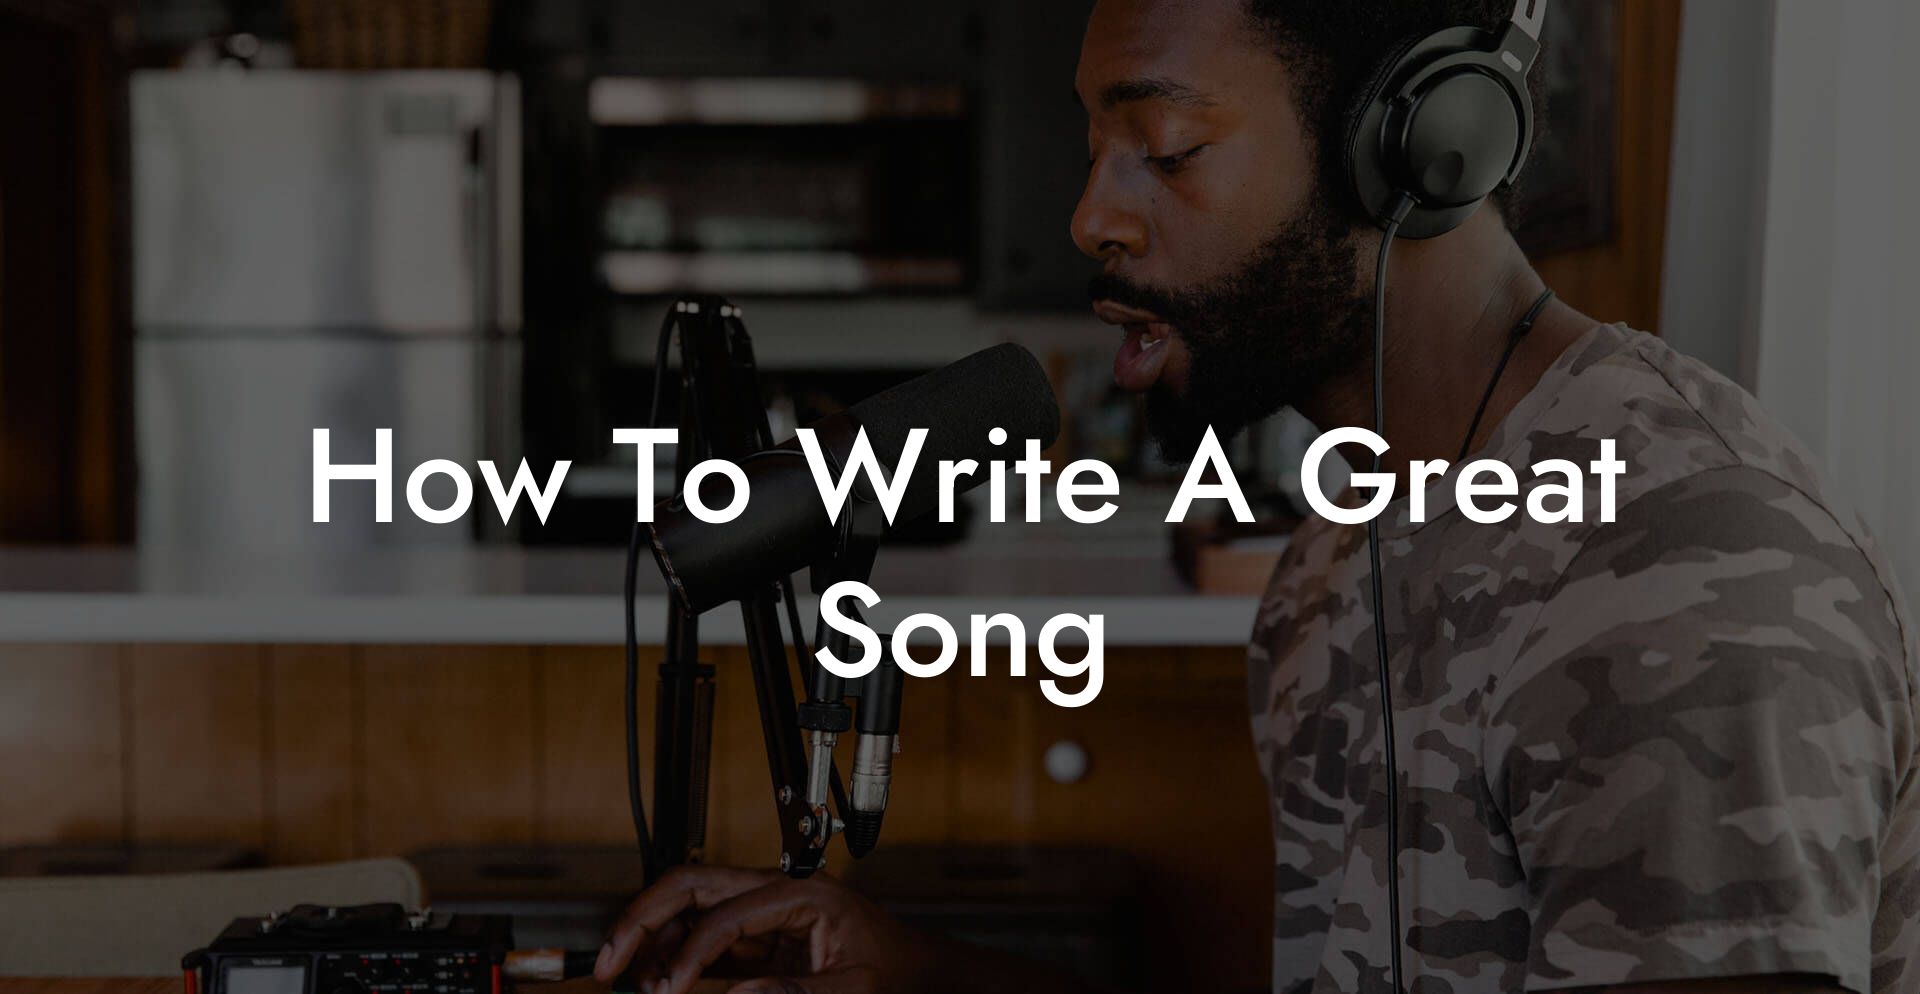 how to write a great song lyric assistant